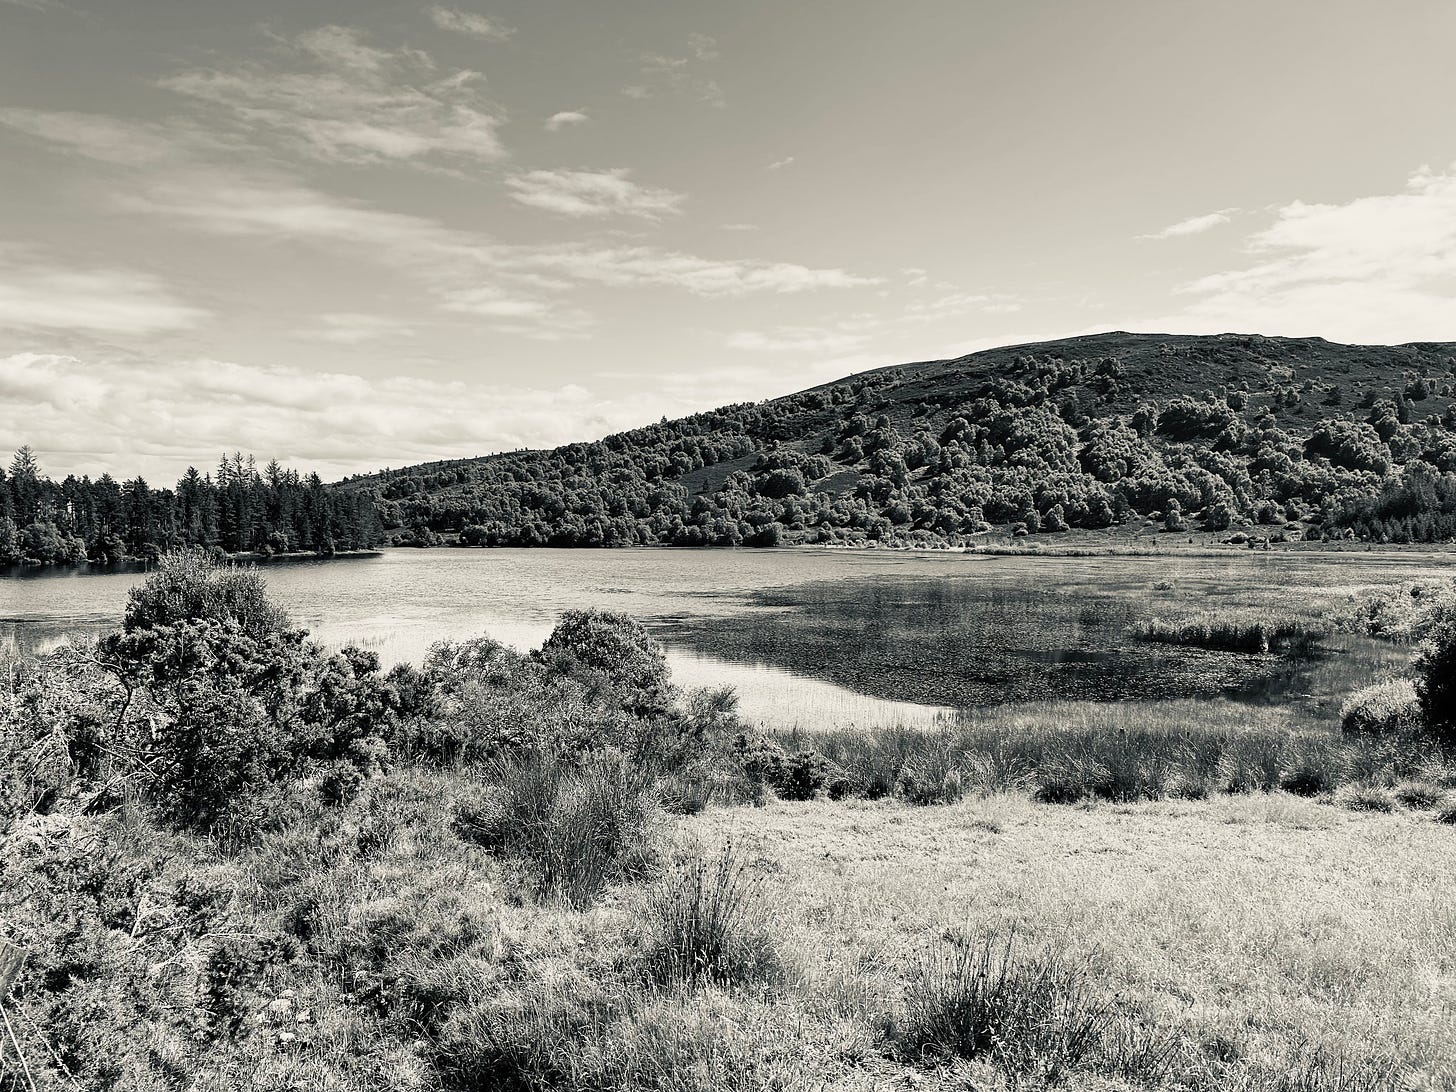 A black and white photo of a loch. Behind the water is a hill with bushes climbing up it. In the foreground is dry grass and reeds. The water looks shallow.